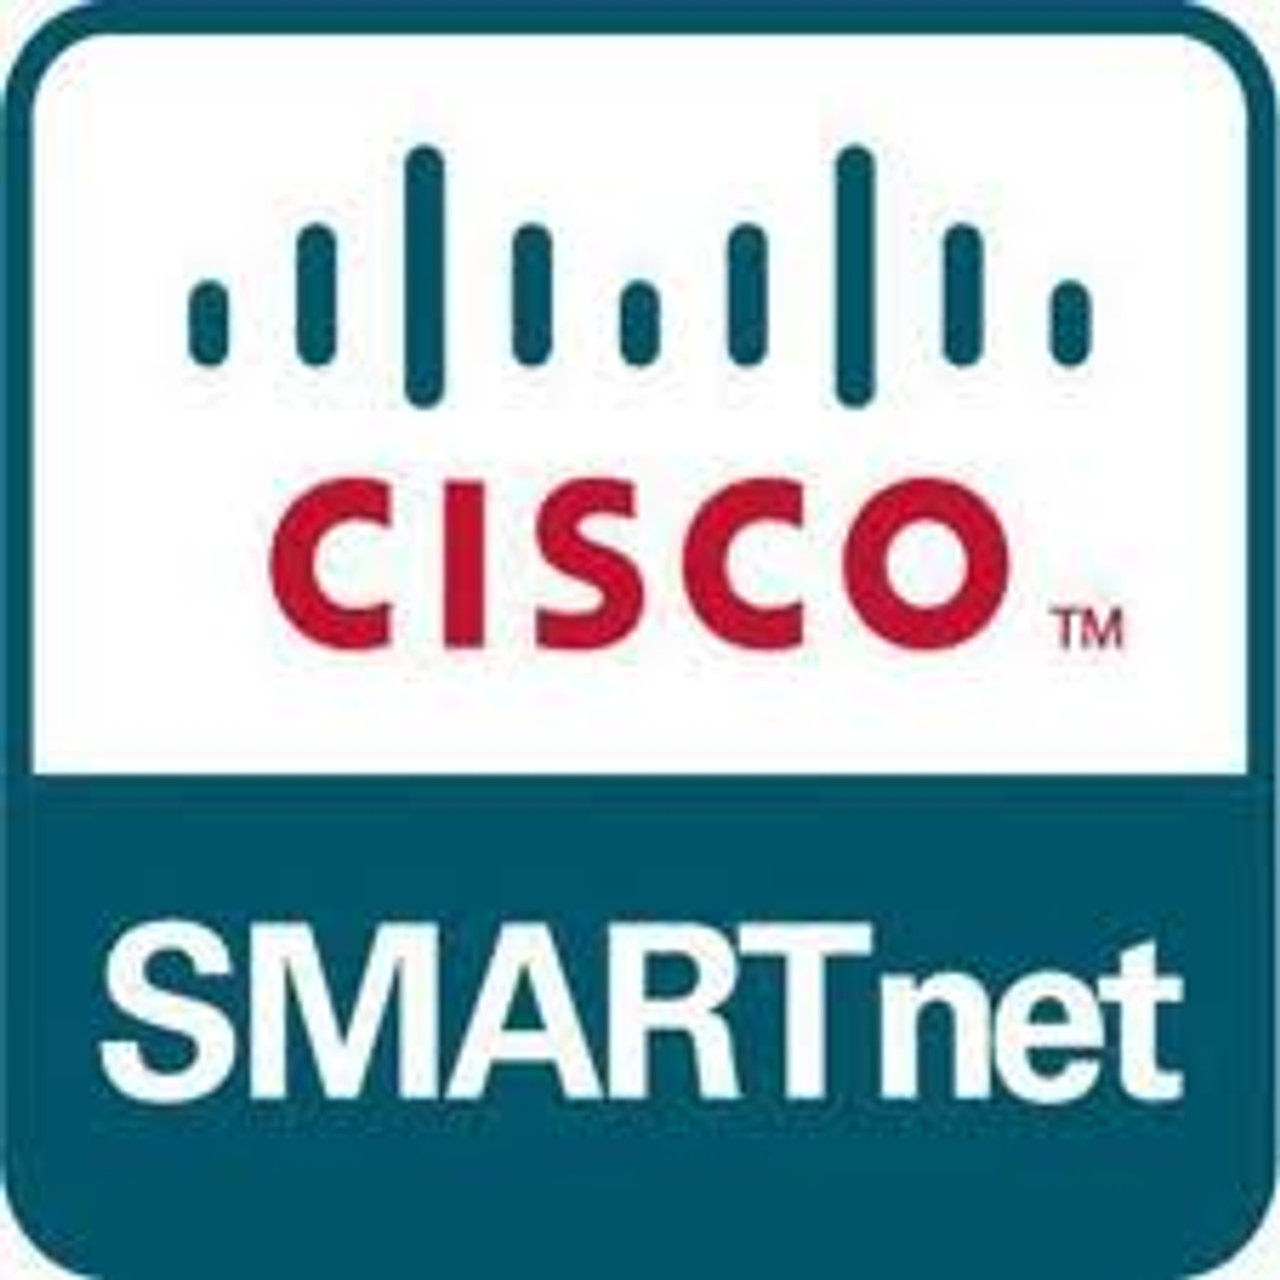 Cisco SMARTnet with 8x5 next business day-Hardware Advance Replacement